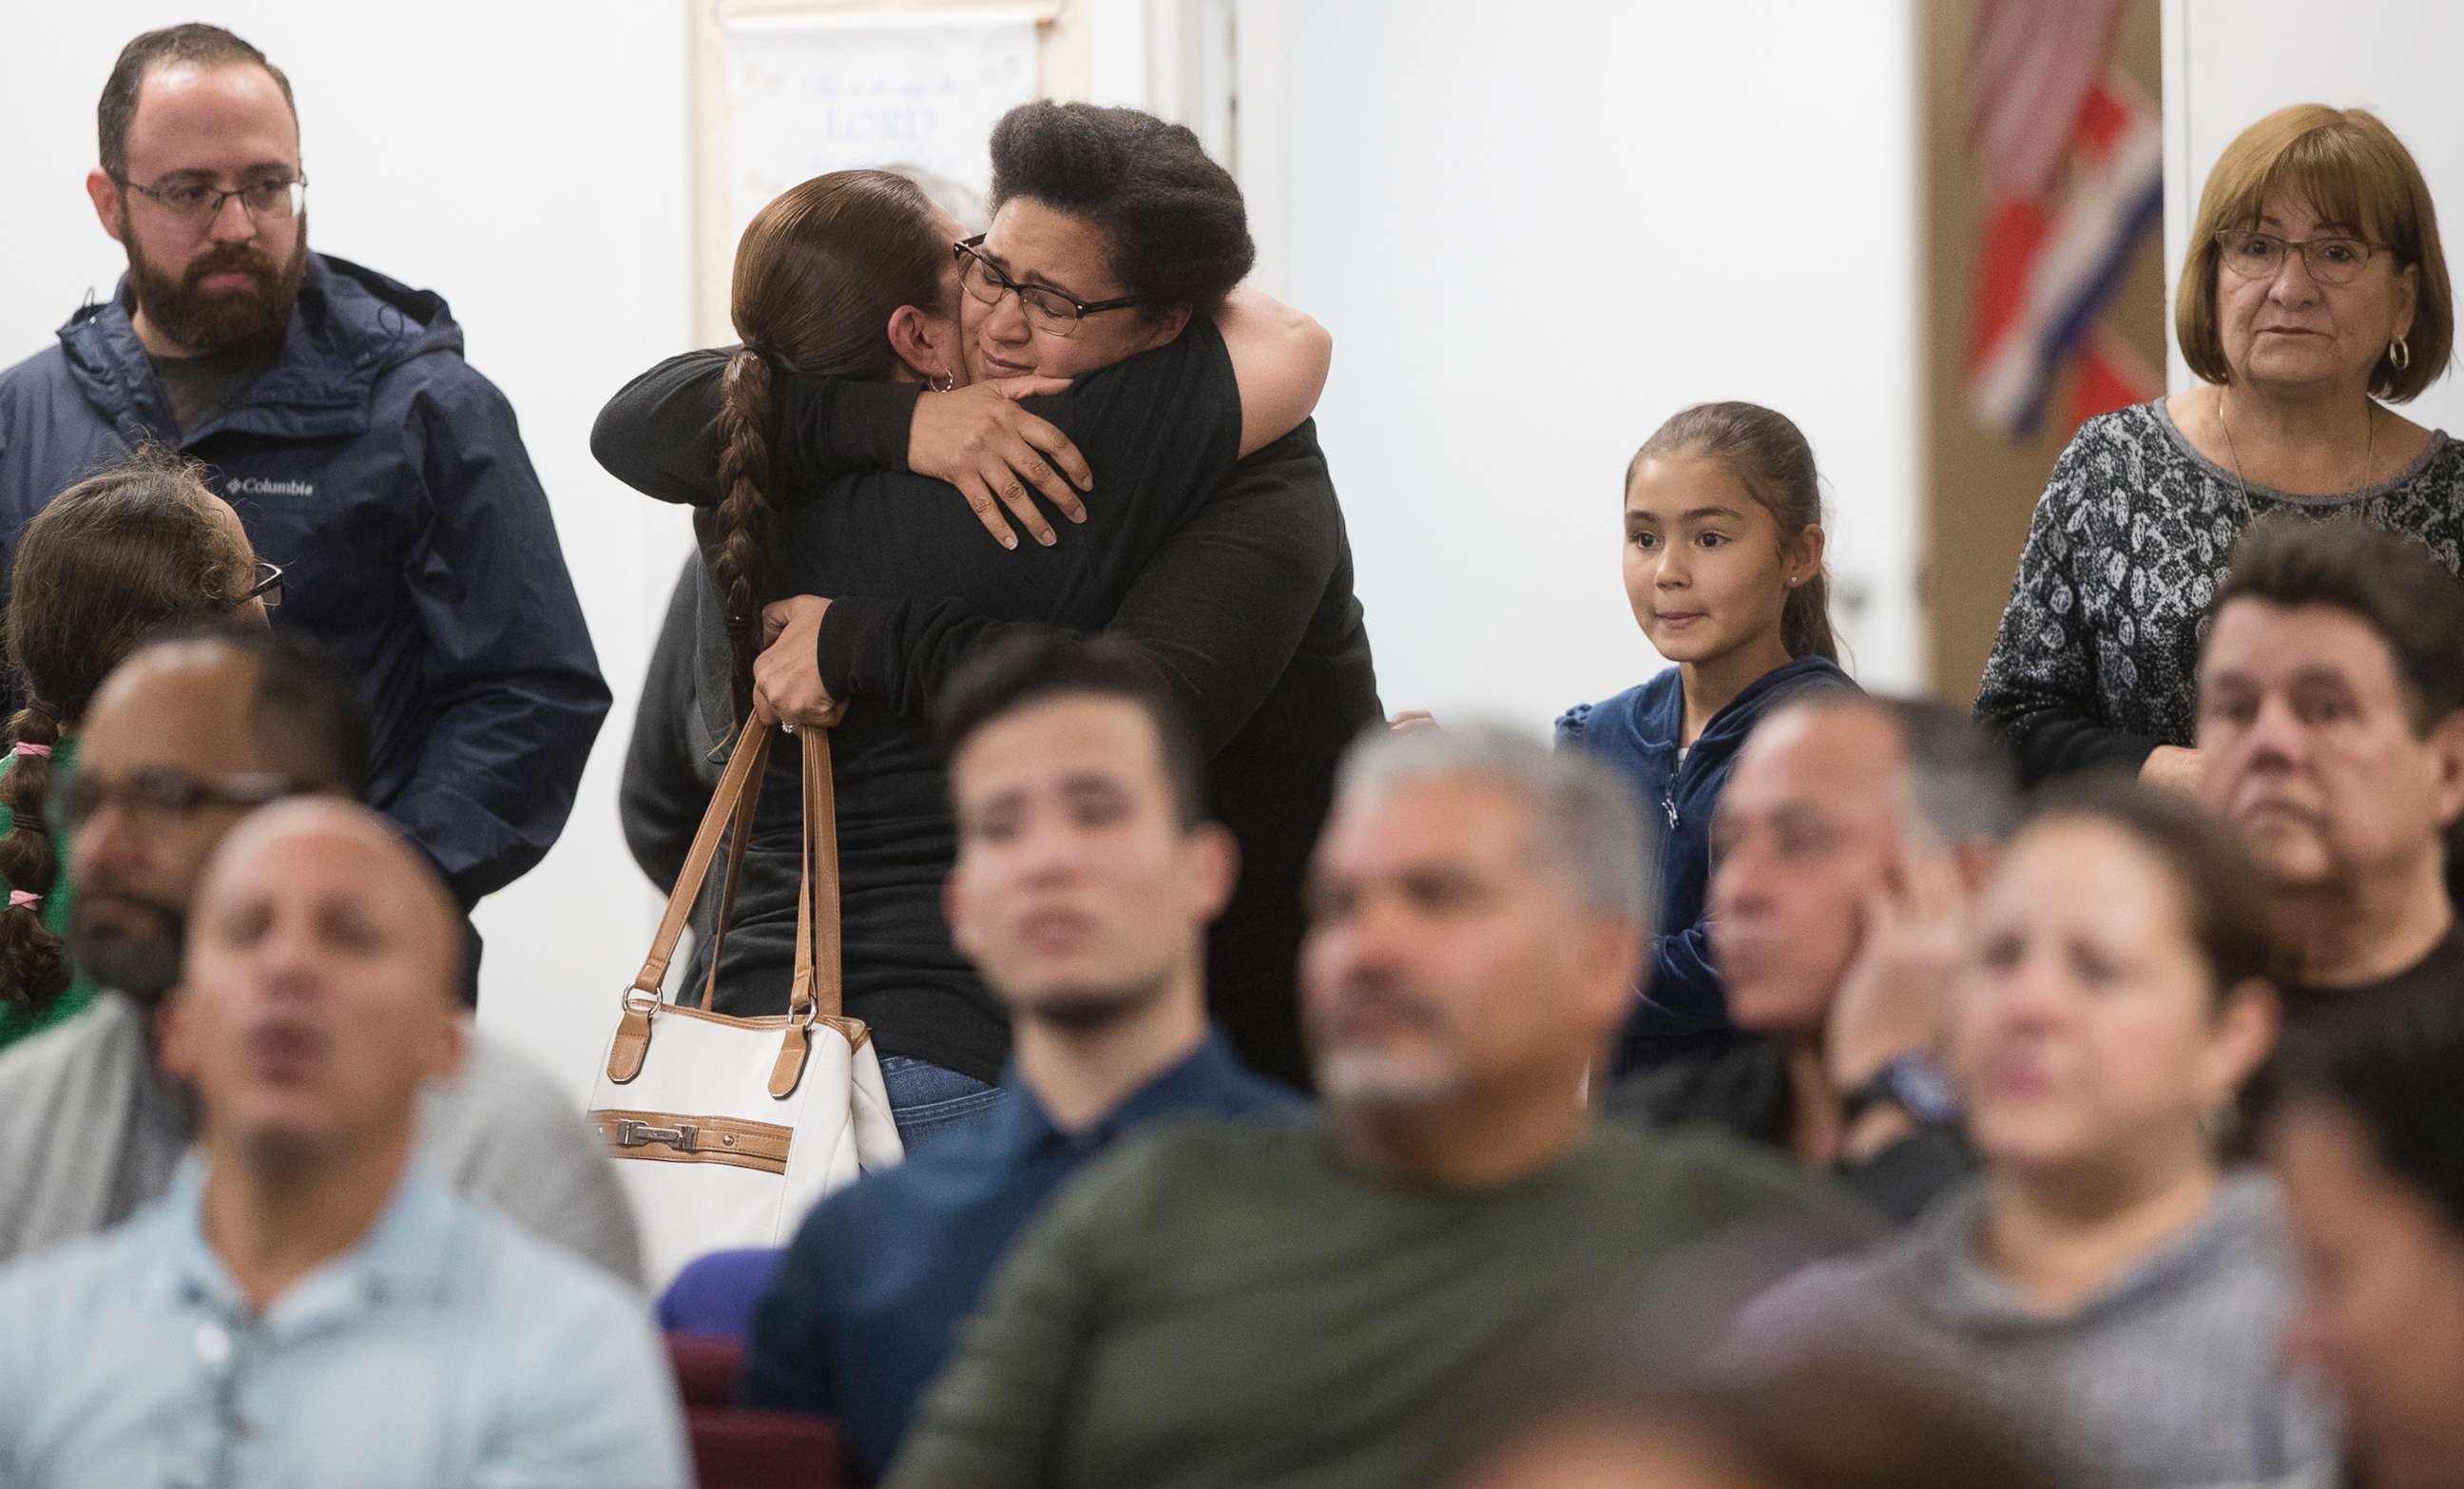 PHOTO: Members of the community attend a memorial service for Marisol Lopez at Nuevo Pacto United Methodist Church in Sebring, Fla., Jan. 24, 2019. Lopez was one of five people killed in a shooting in the Sebring SunTrust Bank.